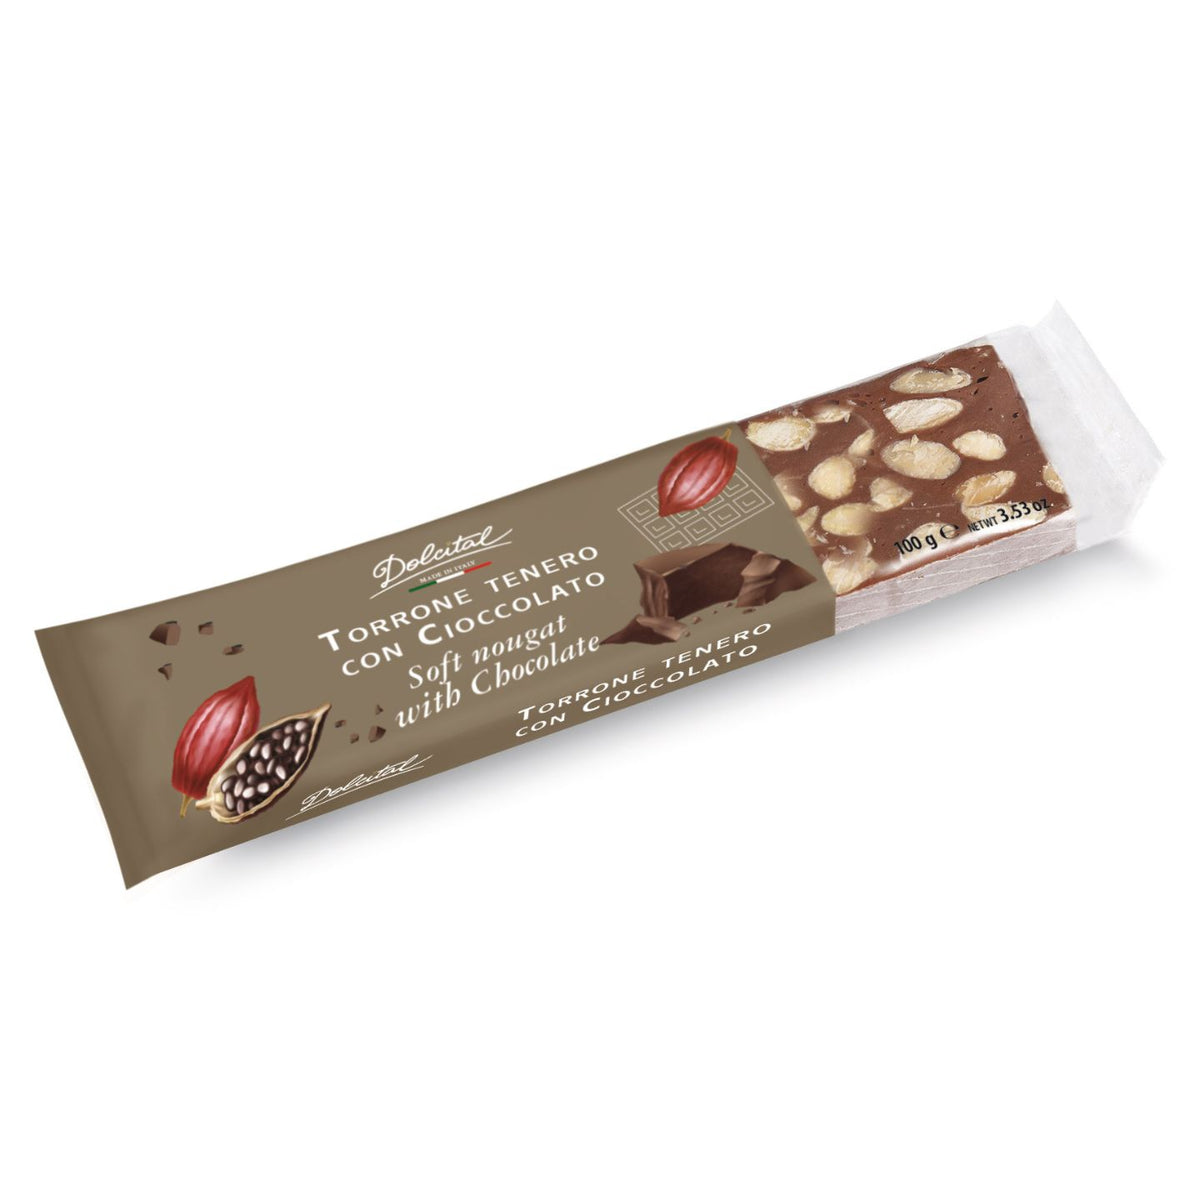 Dolcital Soft Nougat with Chocolate &amp; Hazelnuts 100g  | Imported and distributed in the UK by Just Gourmet Foods